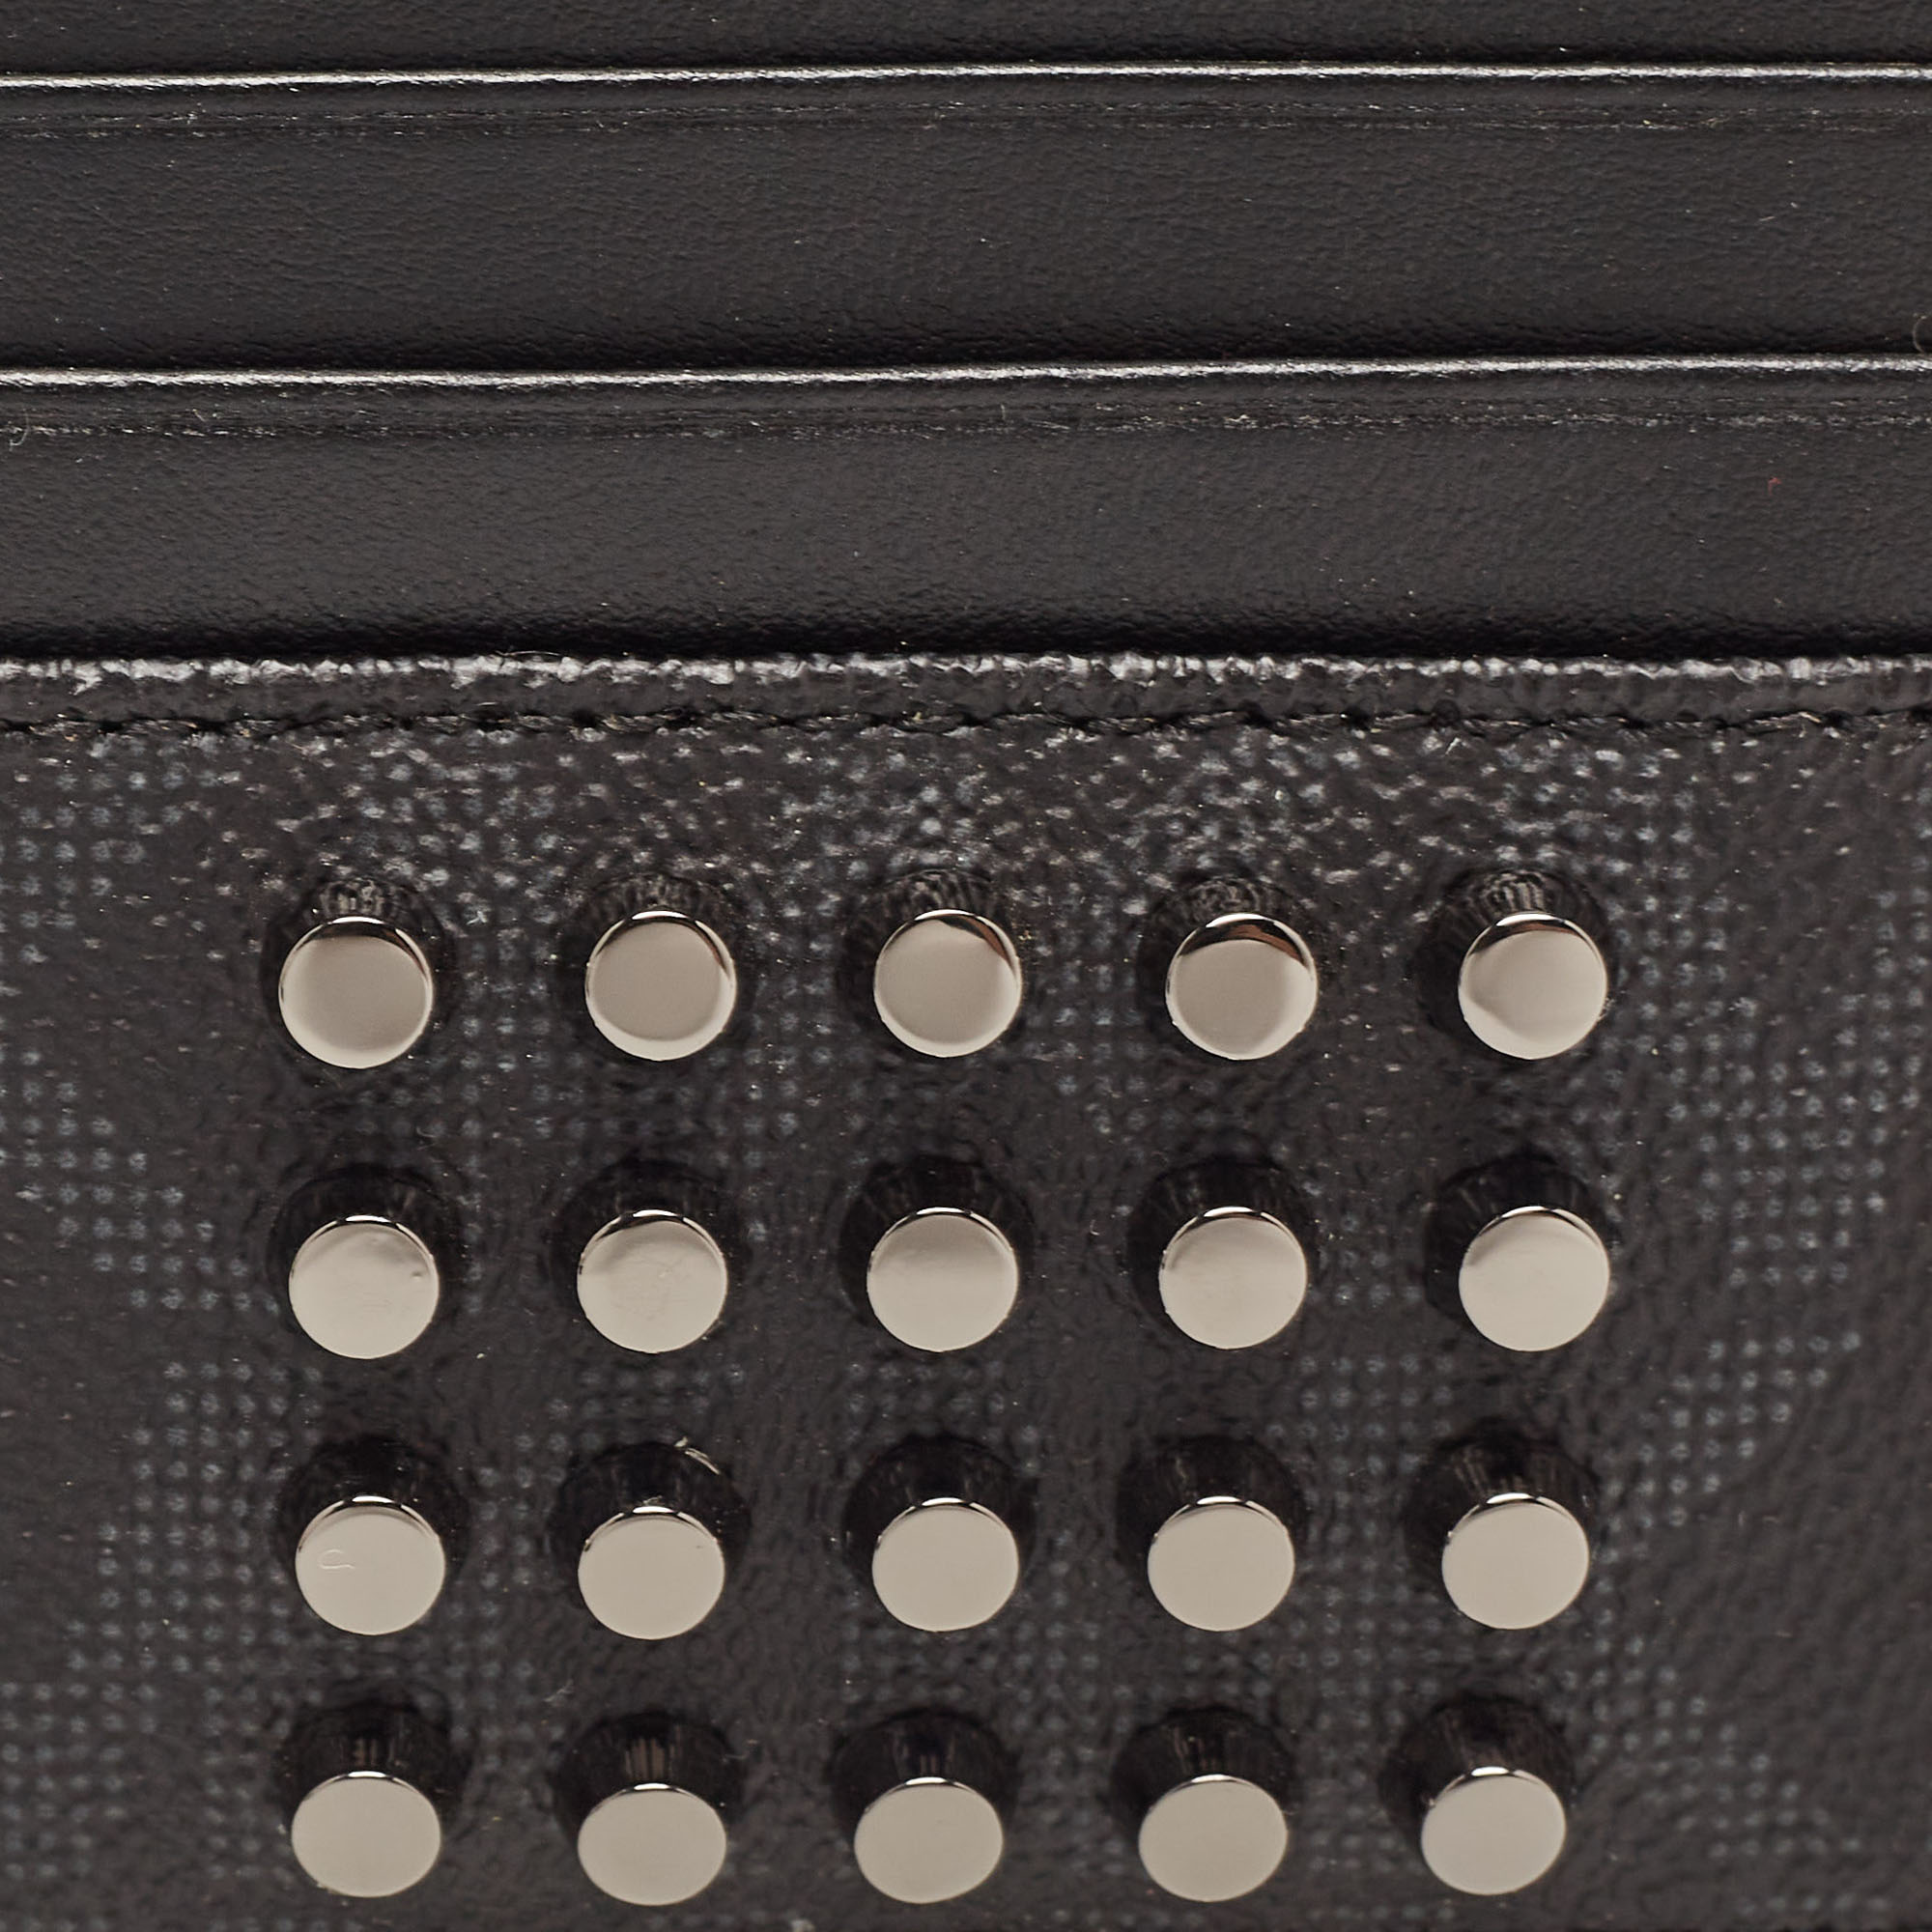 Michael Kors Black Signature Coated Canvas And Leather Studded Tall Card Case